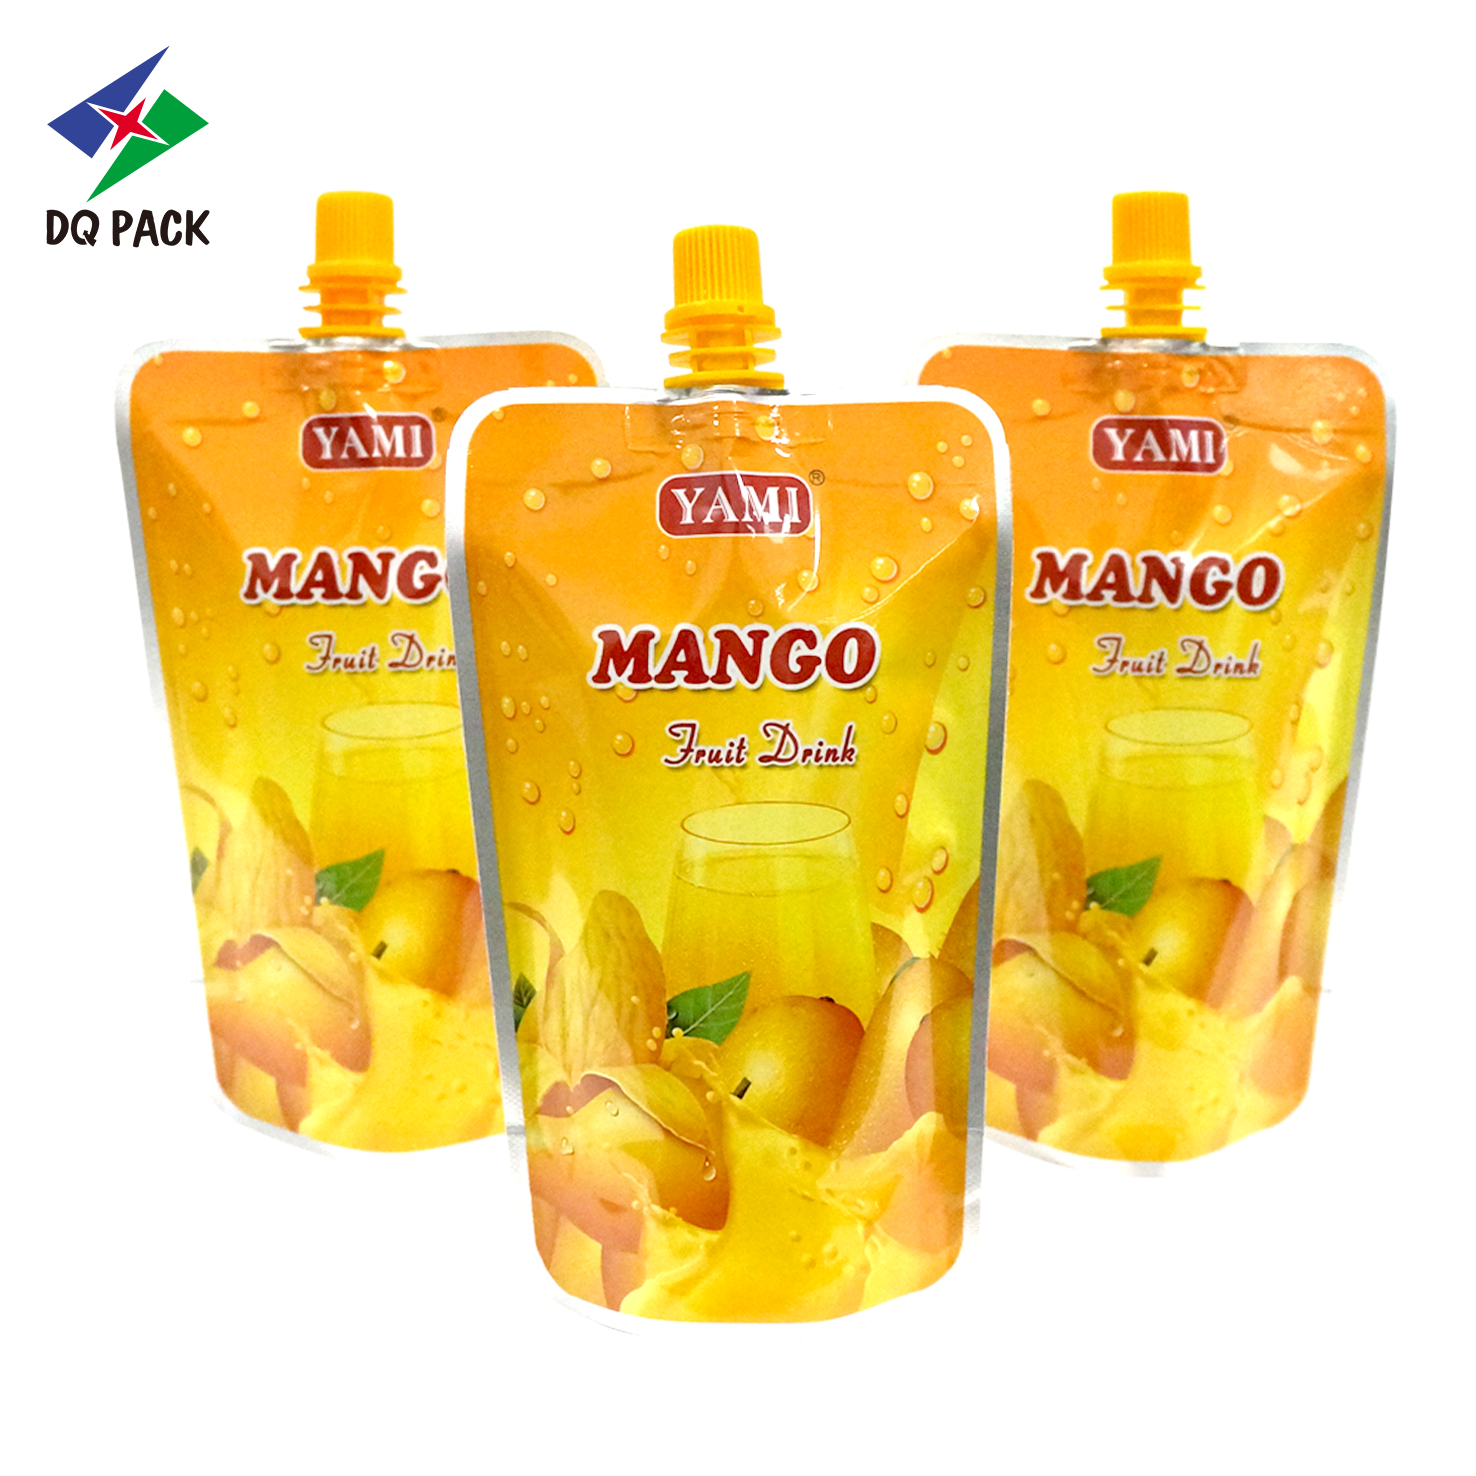 DQ PACK Glossy Surface Bag 250ML Mango Juice Packaging Bag Liquid Plastic Stand Up Spout Pouch No-Leaking Fruit Yogurt Doypack